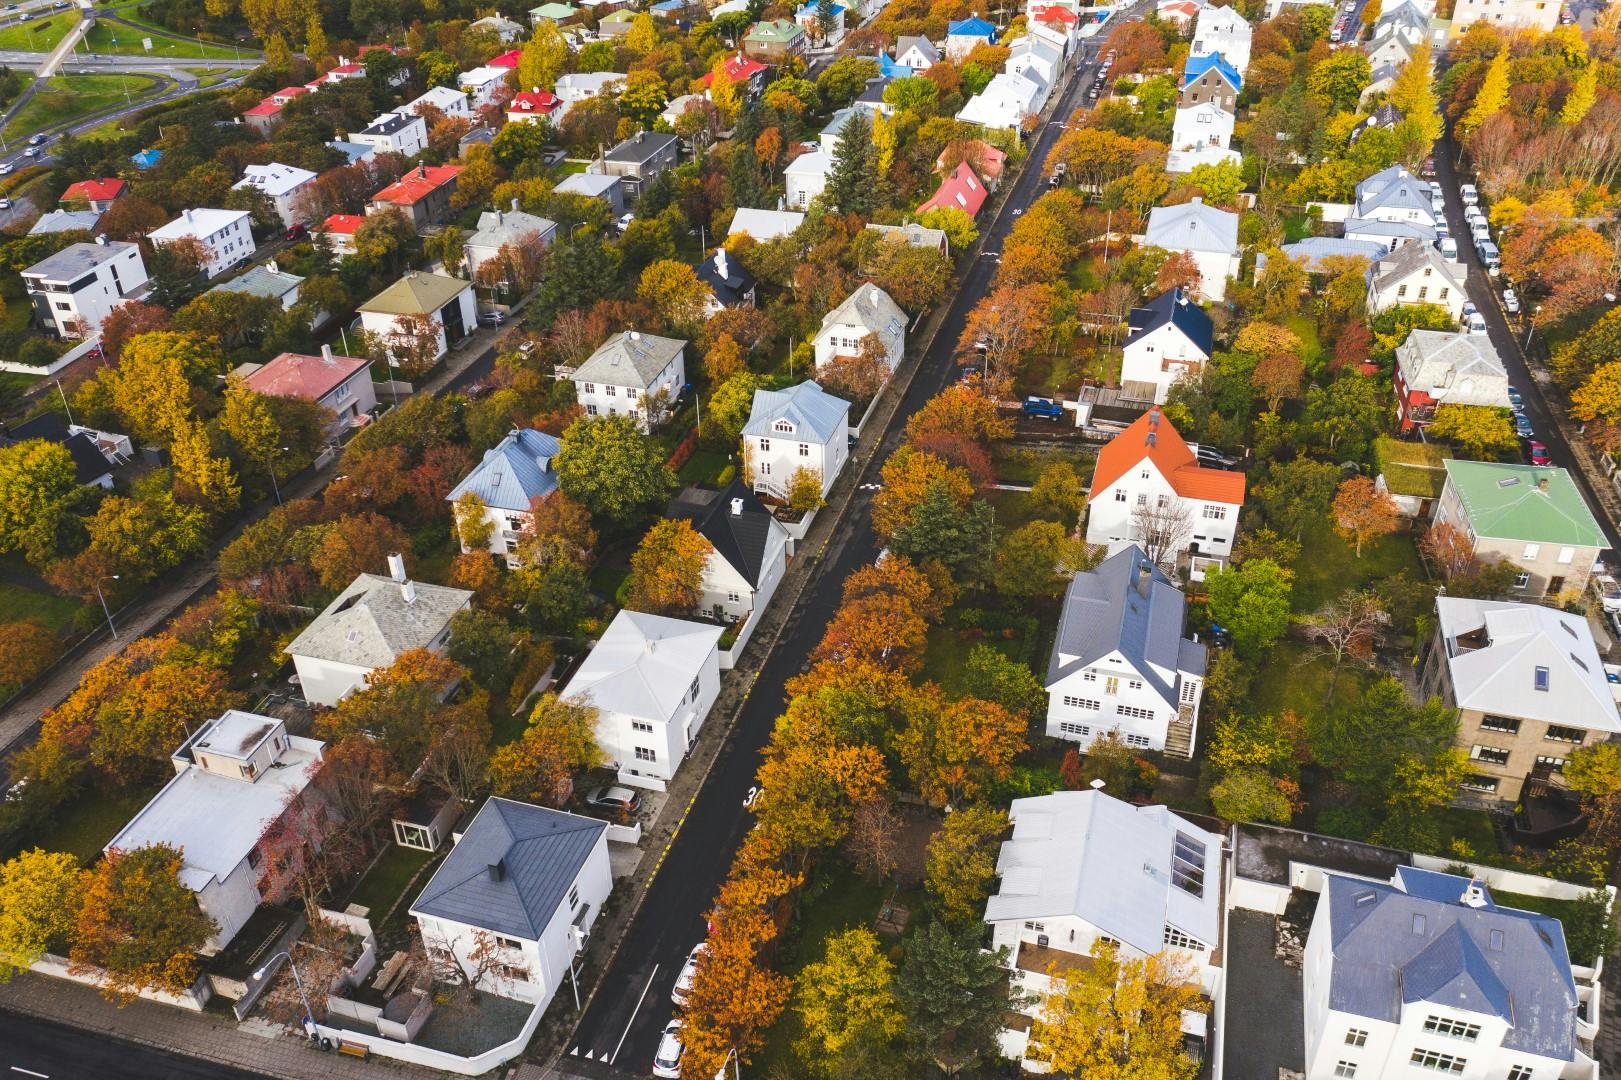 Colorful houses surrounded by trees in Reykjavik, seen from above